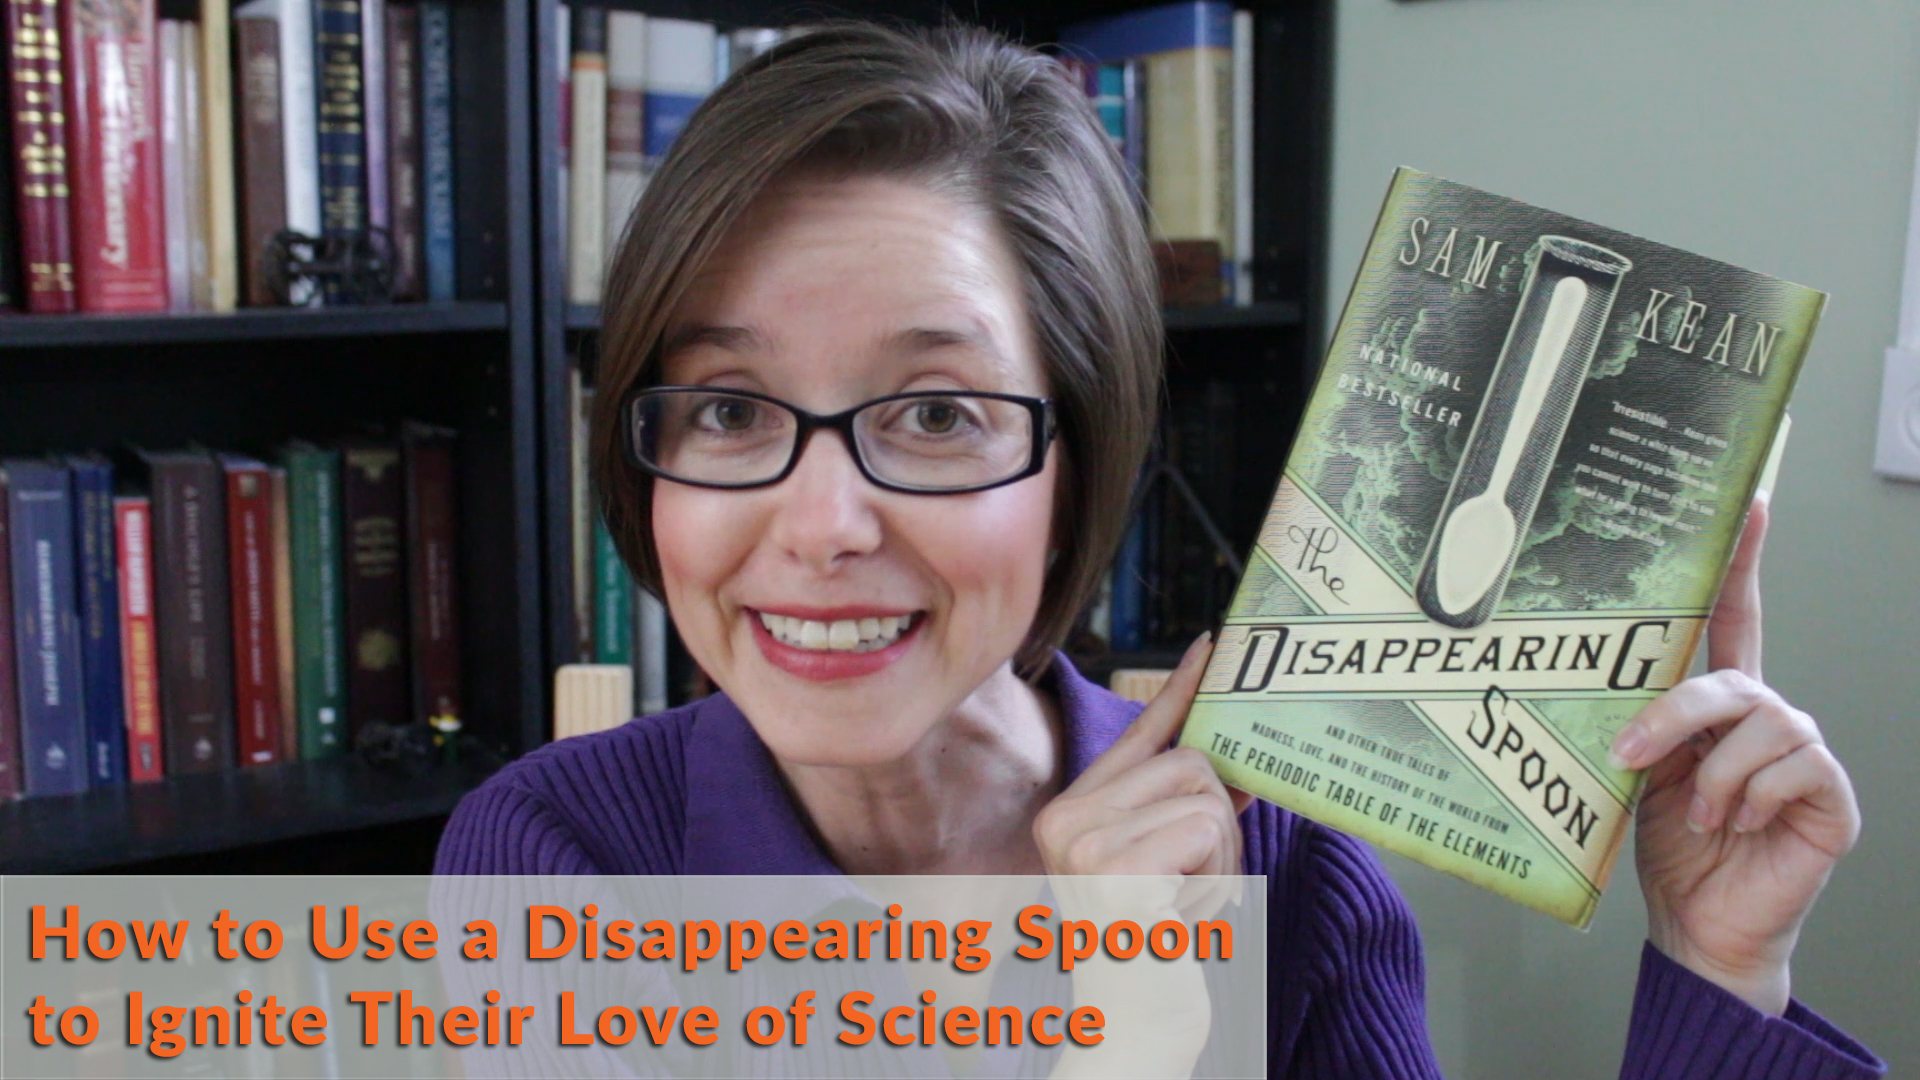 Ignite the Love for Science! The Disappearing Spoon Review